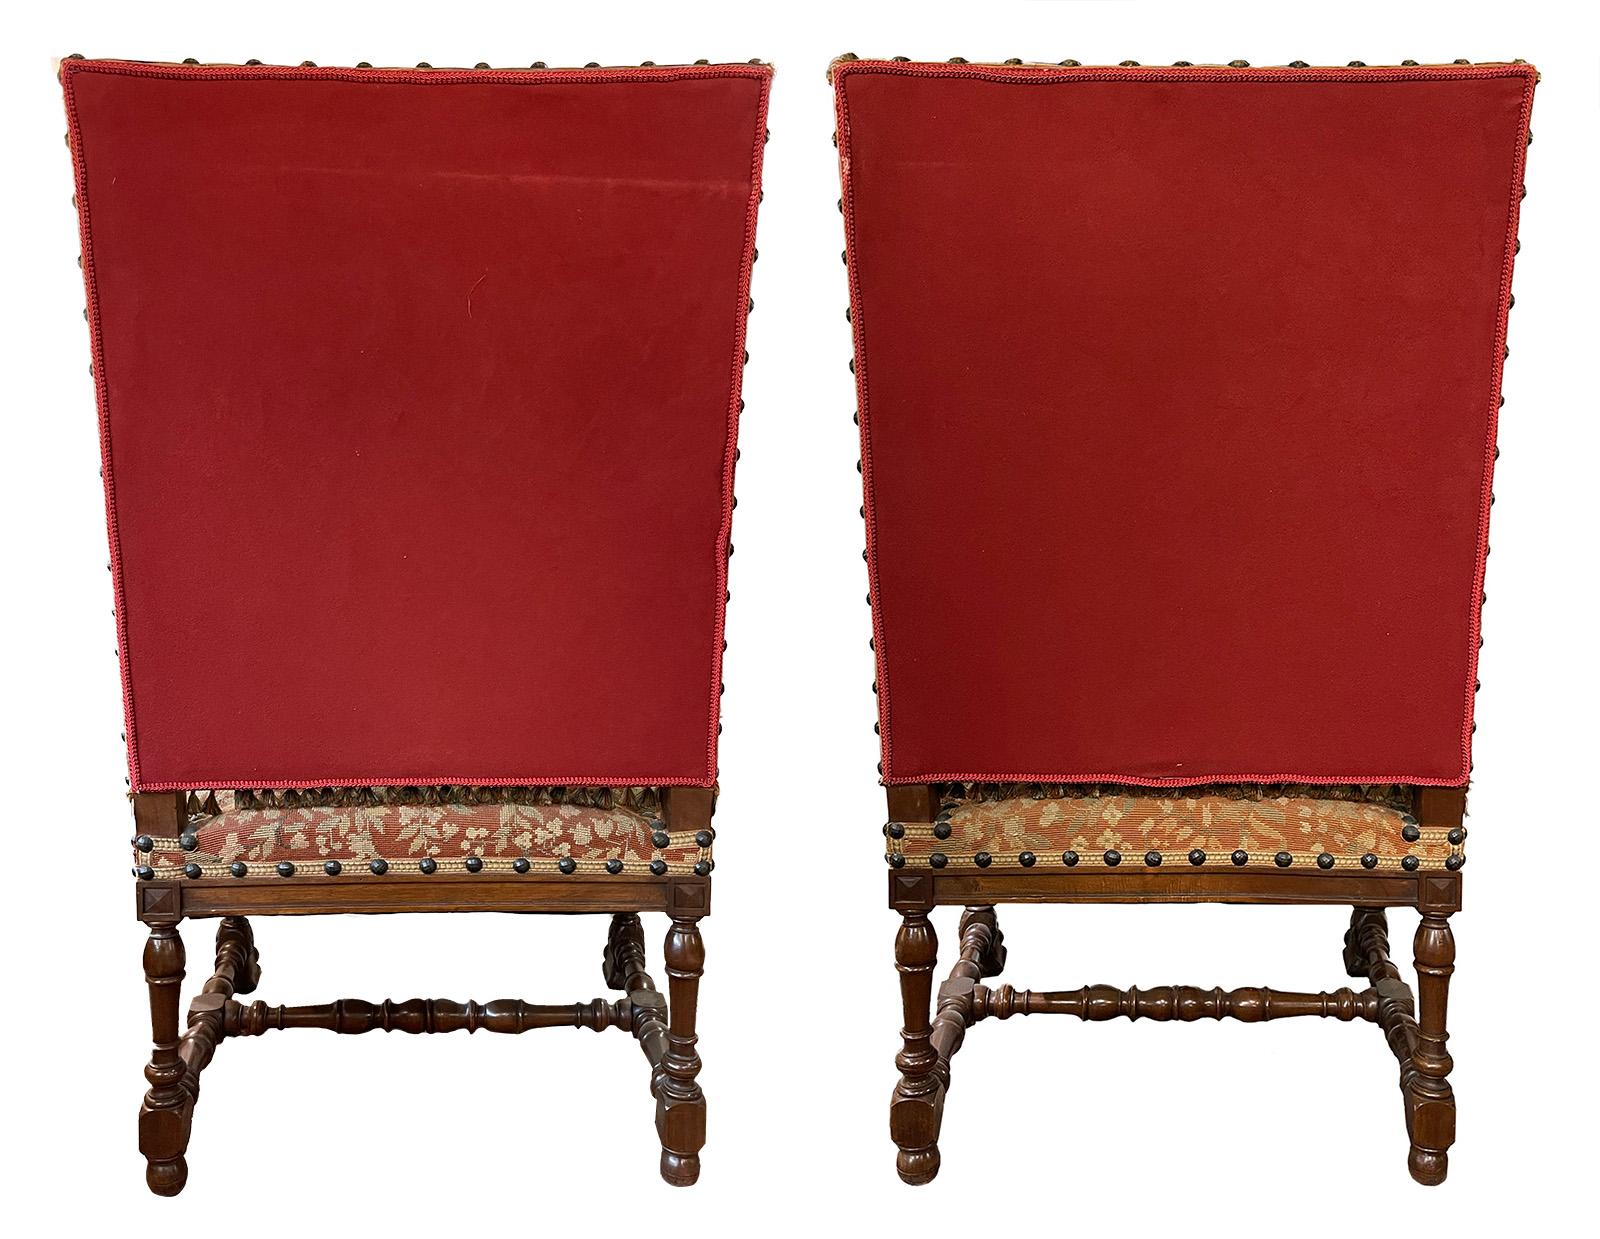 Pair of 19th Century French Unicorn Tapestry Armchairs In Excellent Condition For Sale In Salt Lake City, UT